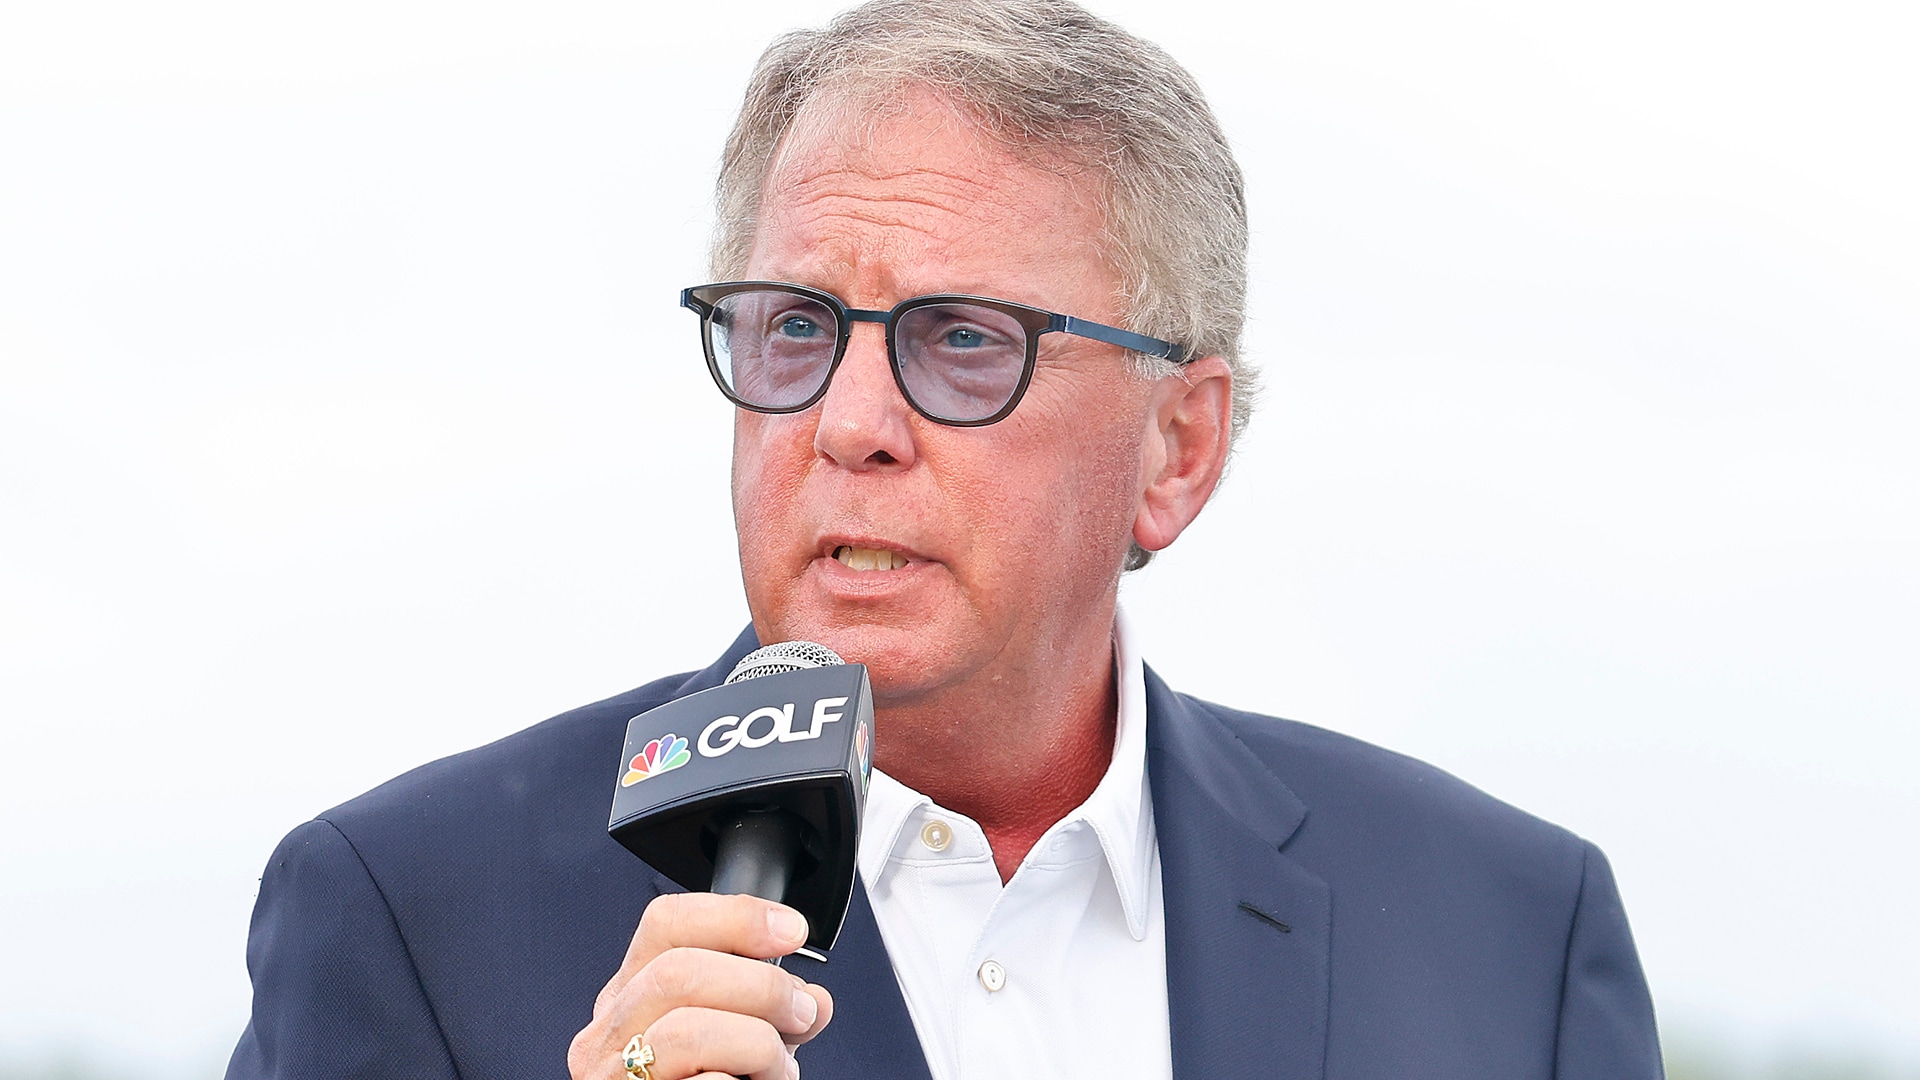 Report: CME Group CEO blasts LPGA leadership after dinner no-shows